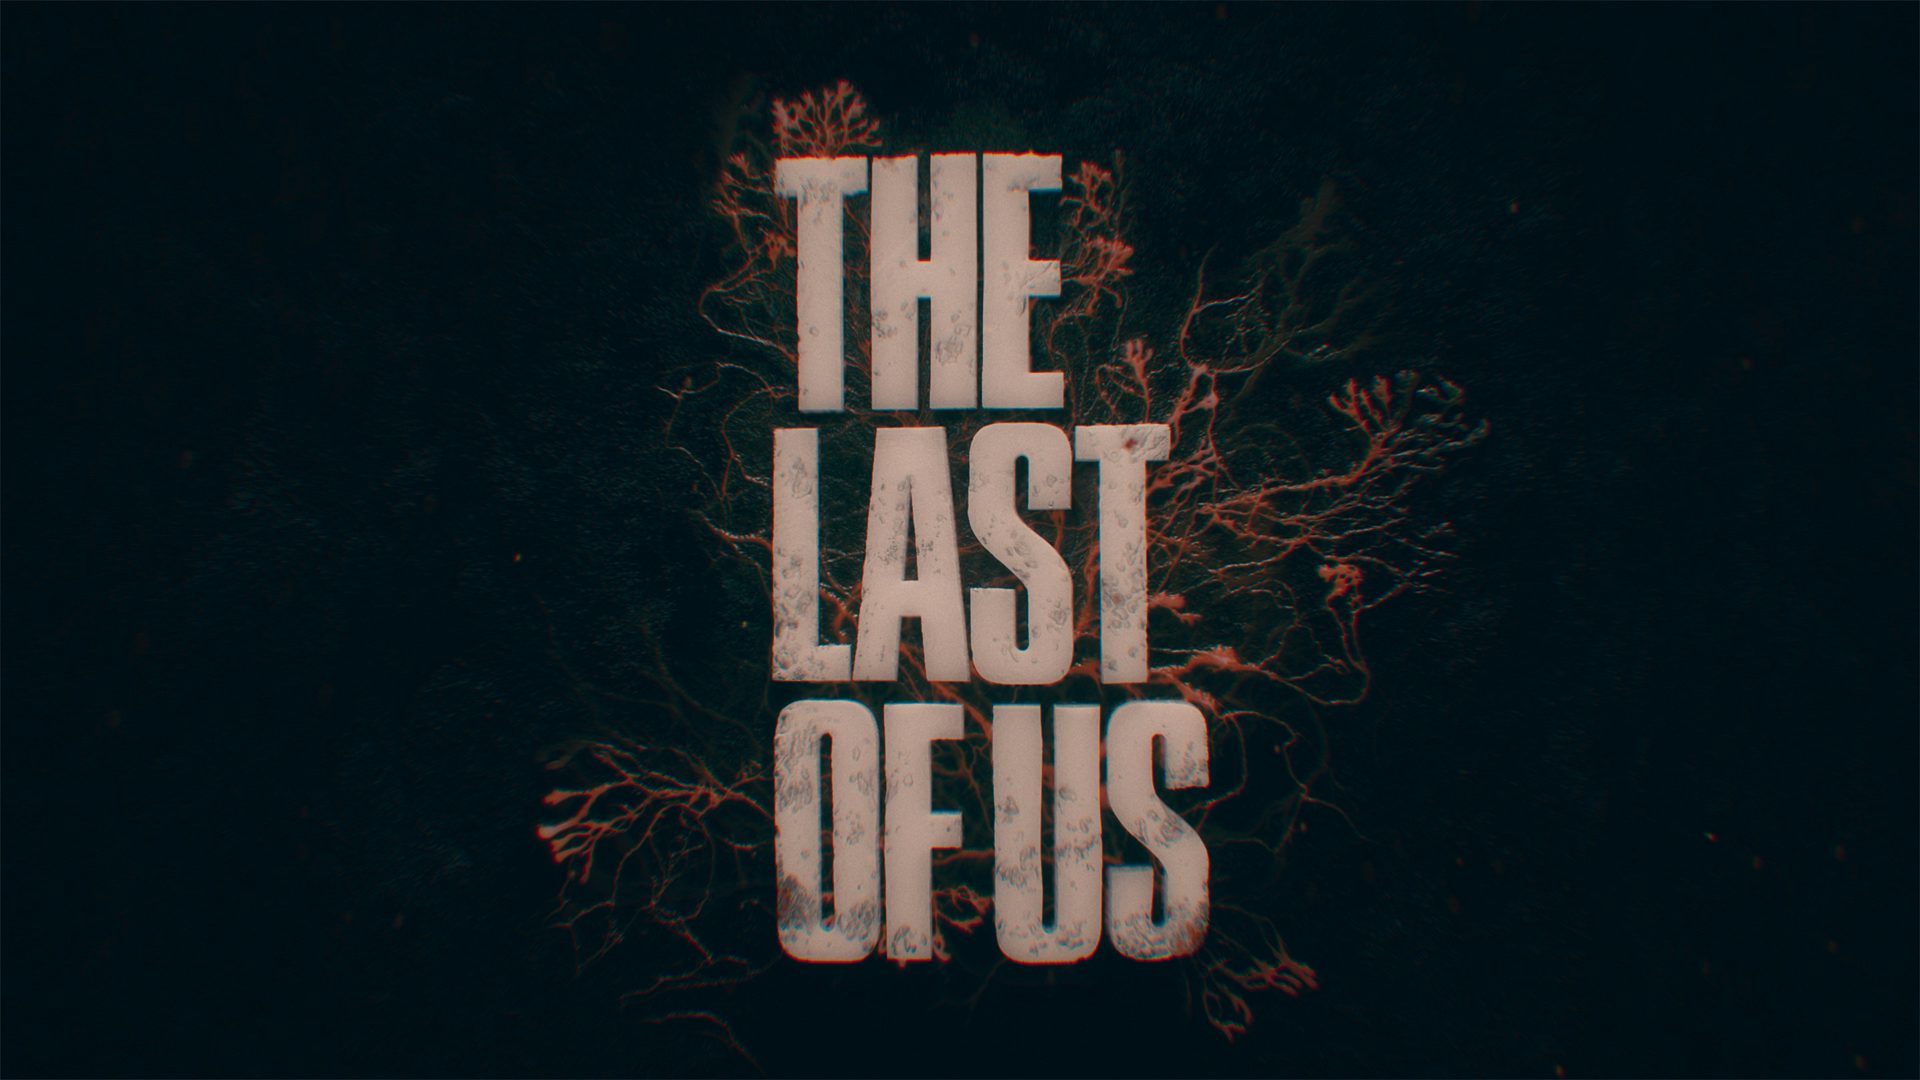 How Elastic created the title sequence for the Last of Us